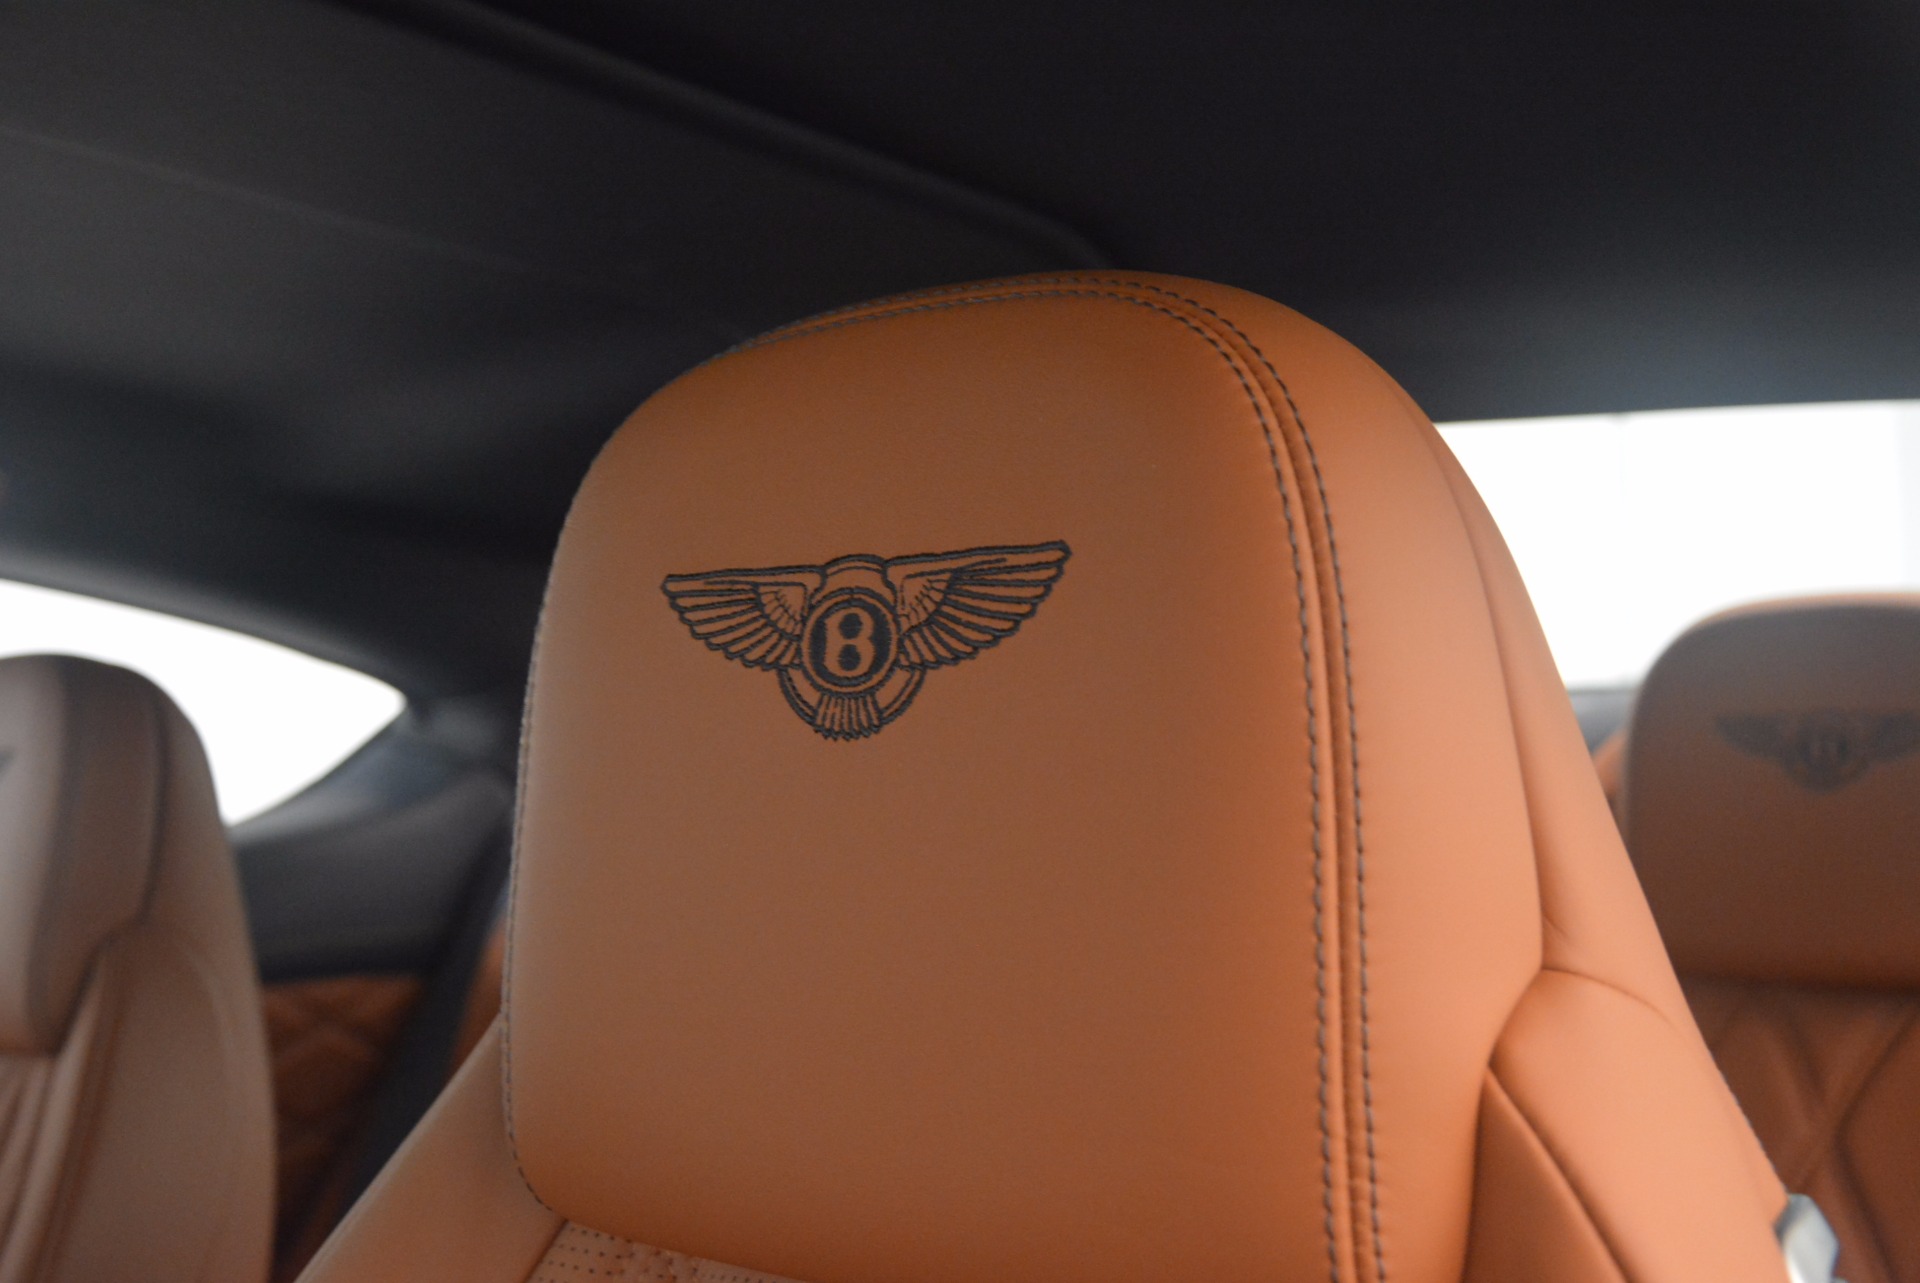 Used 2014 Bentley Continental GT V8